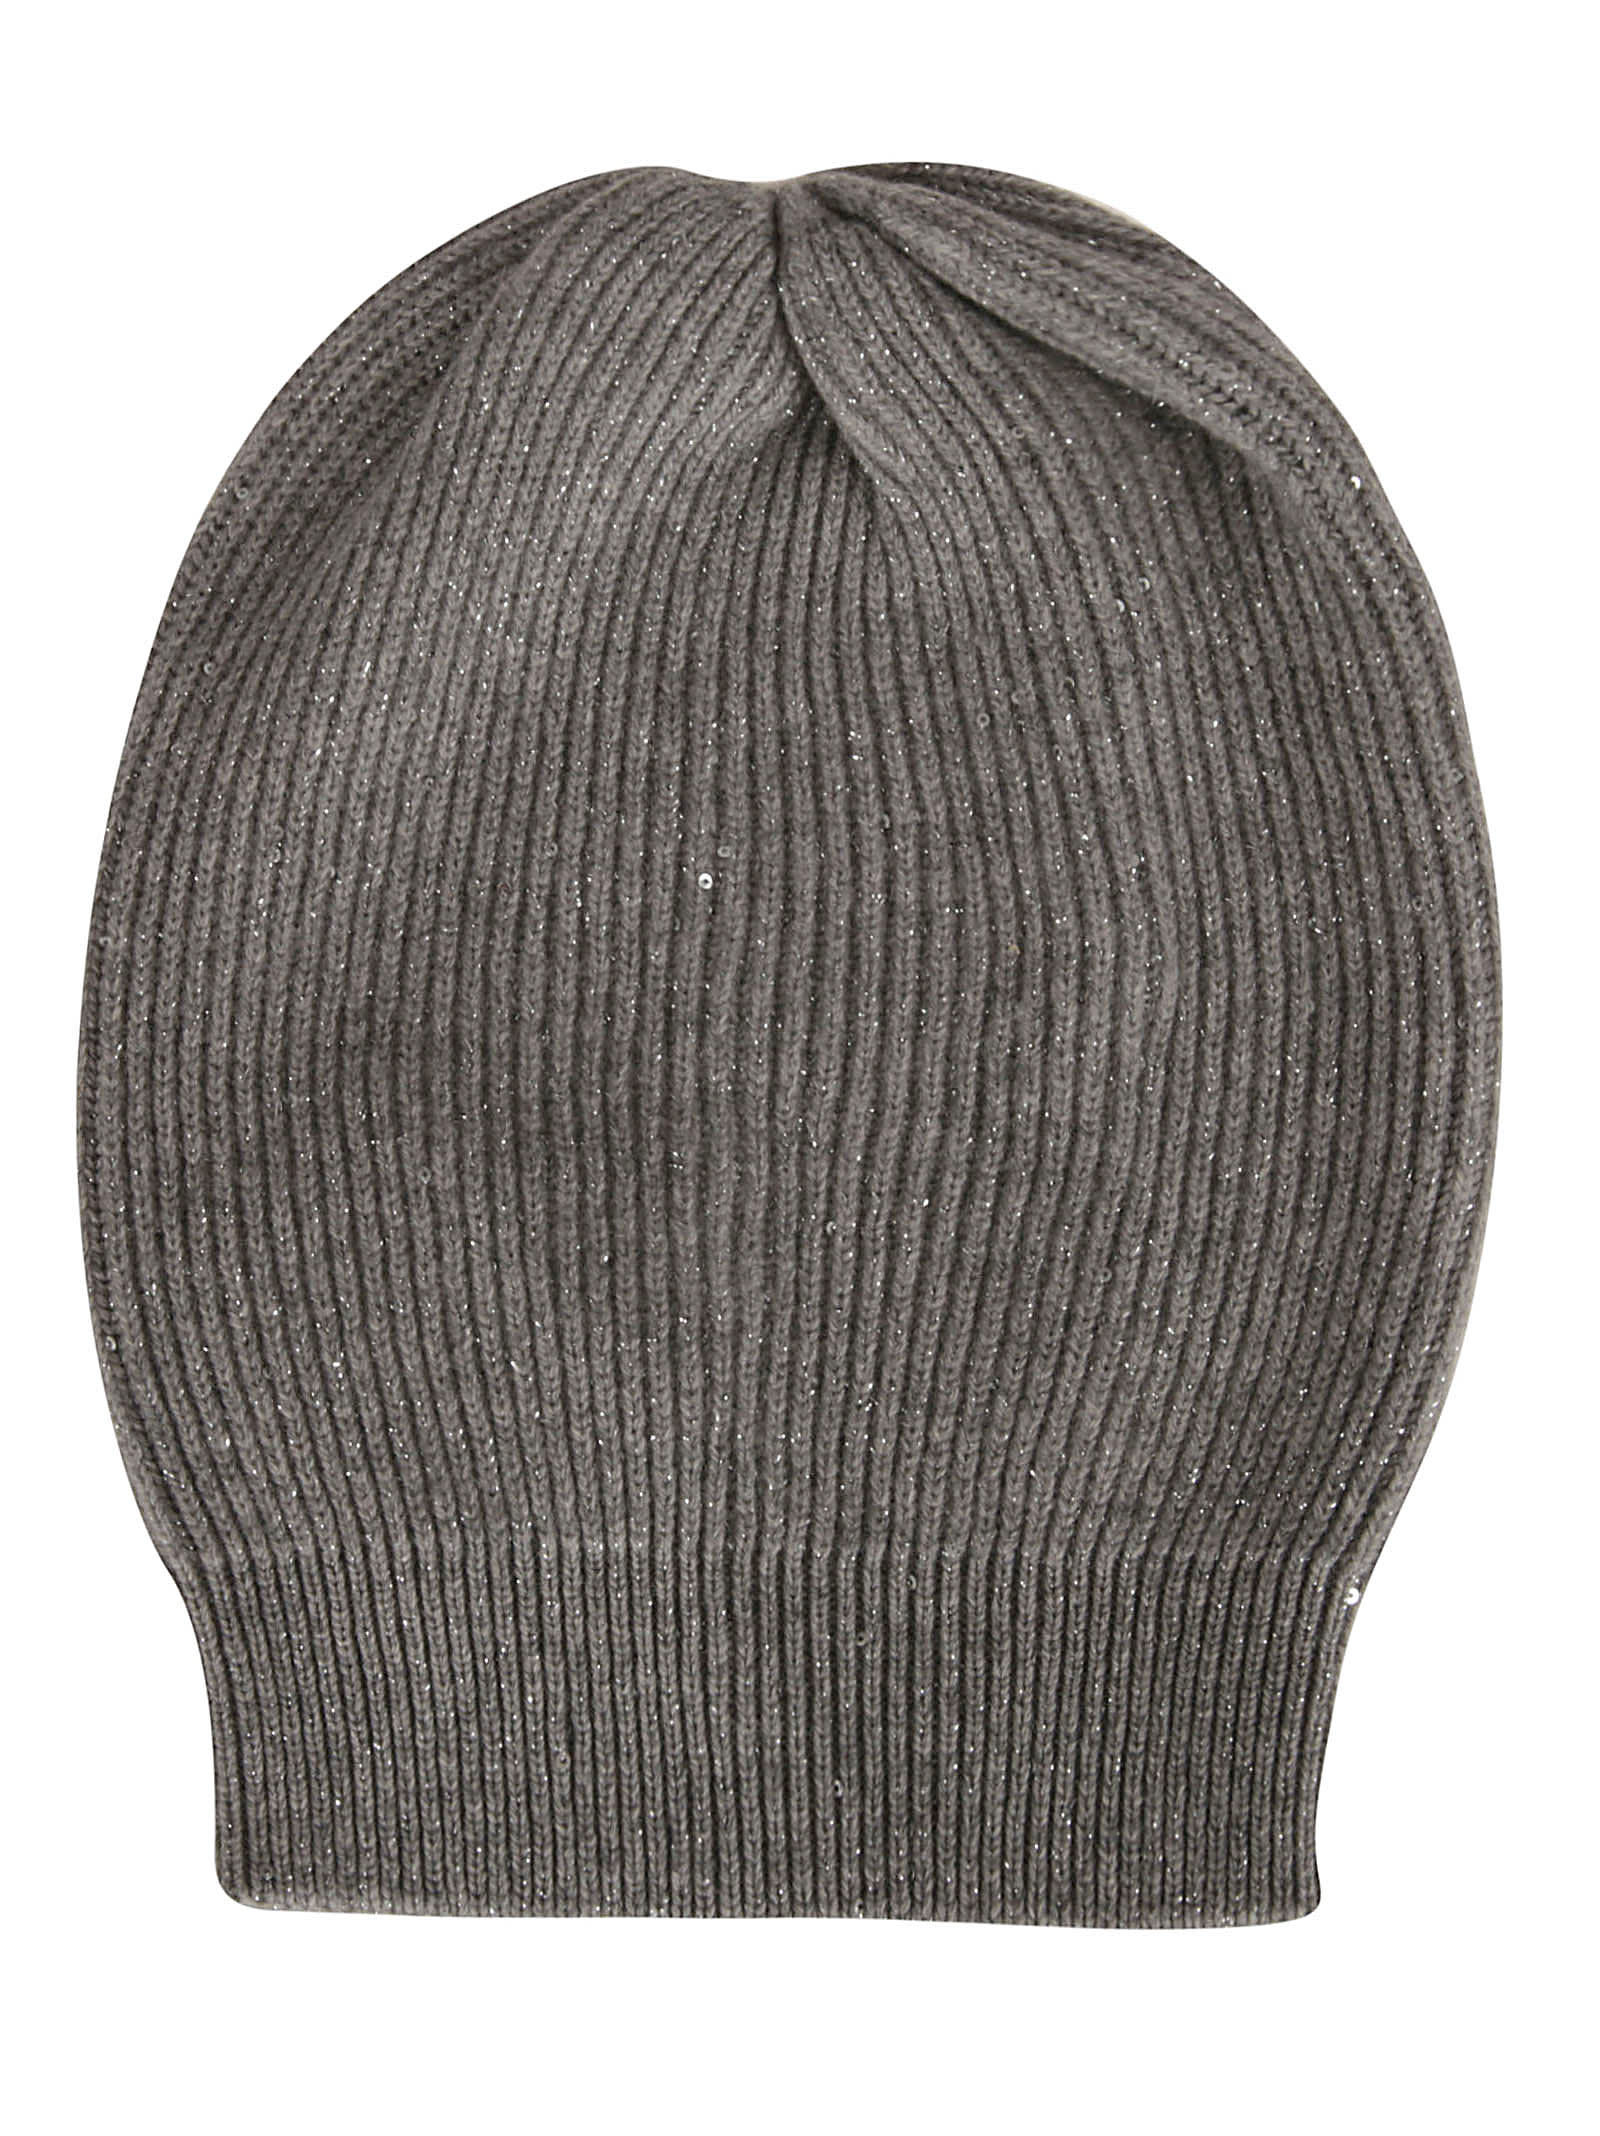 Brunello Cucinelli Ribbed Embellished Knit Beanie